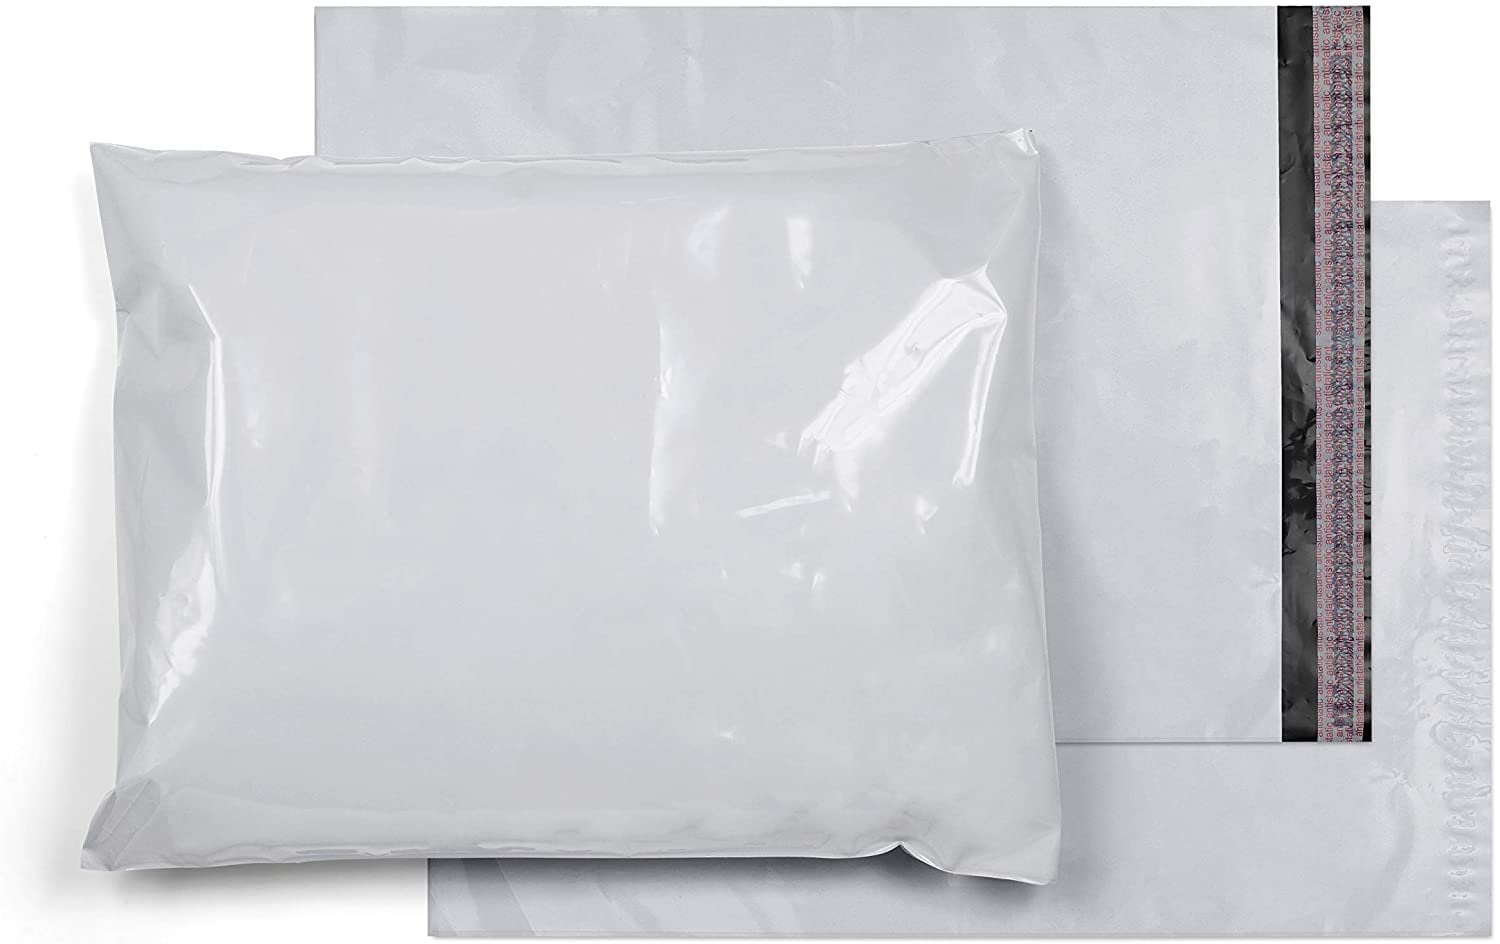 2.5 Mil/White 1000 Pack 7.5 x 10.5 Poly Mailers Shipping Envelopes Bags Waterproof/Self Sealing 